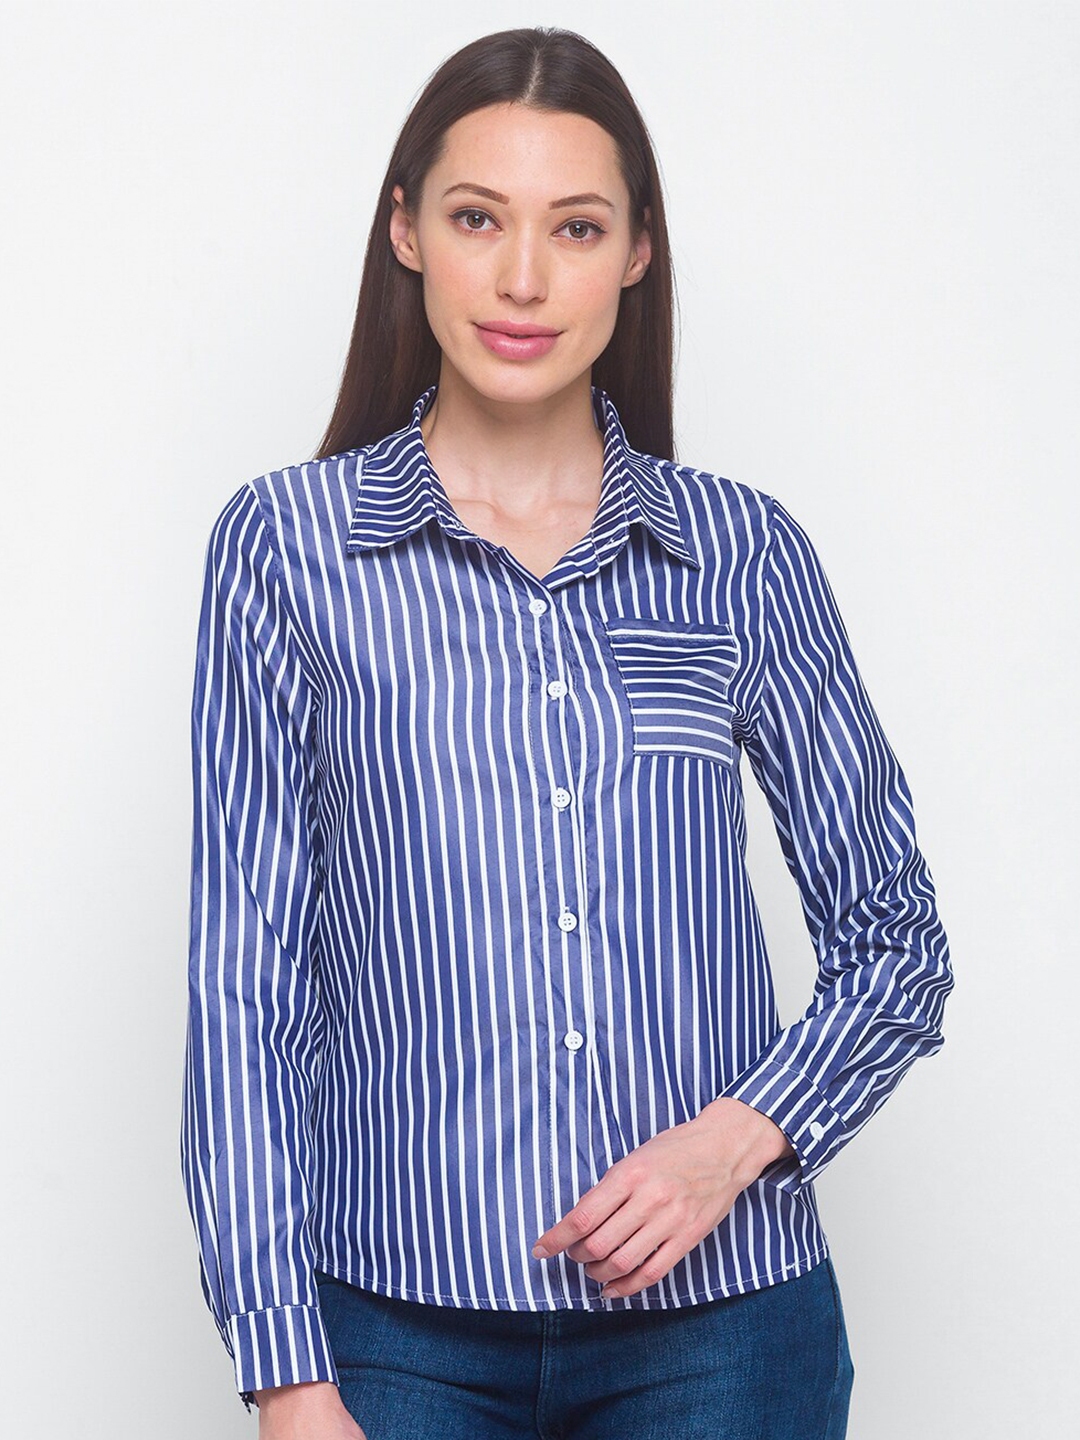 Buy LYKKEIN Navy Blue Striped Shirt Style Top - Tops for Women 16211598 ...